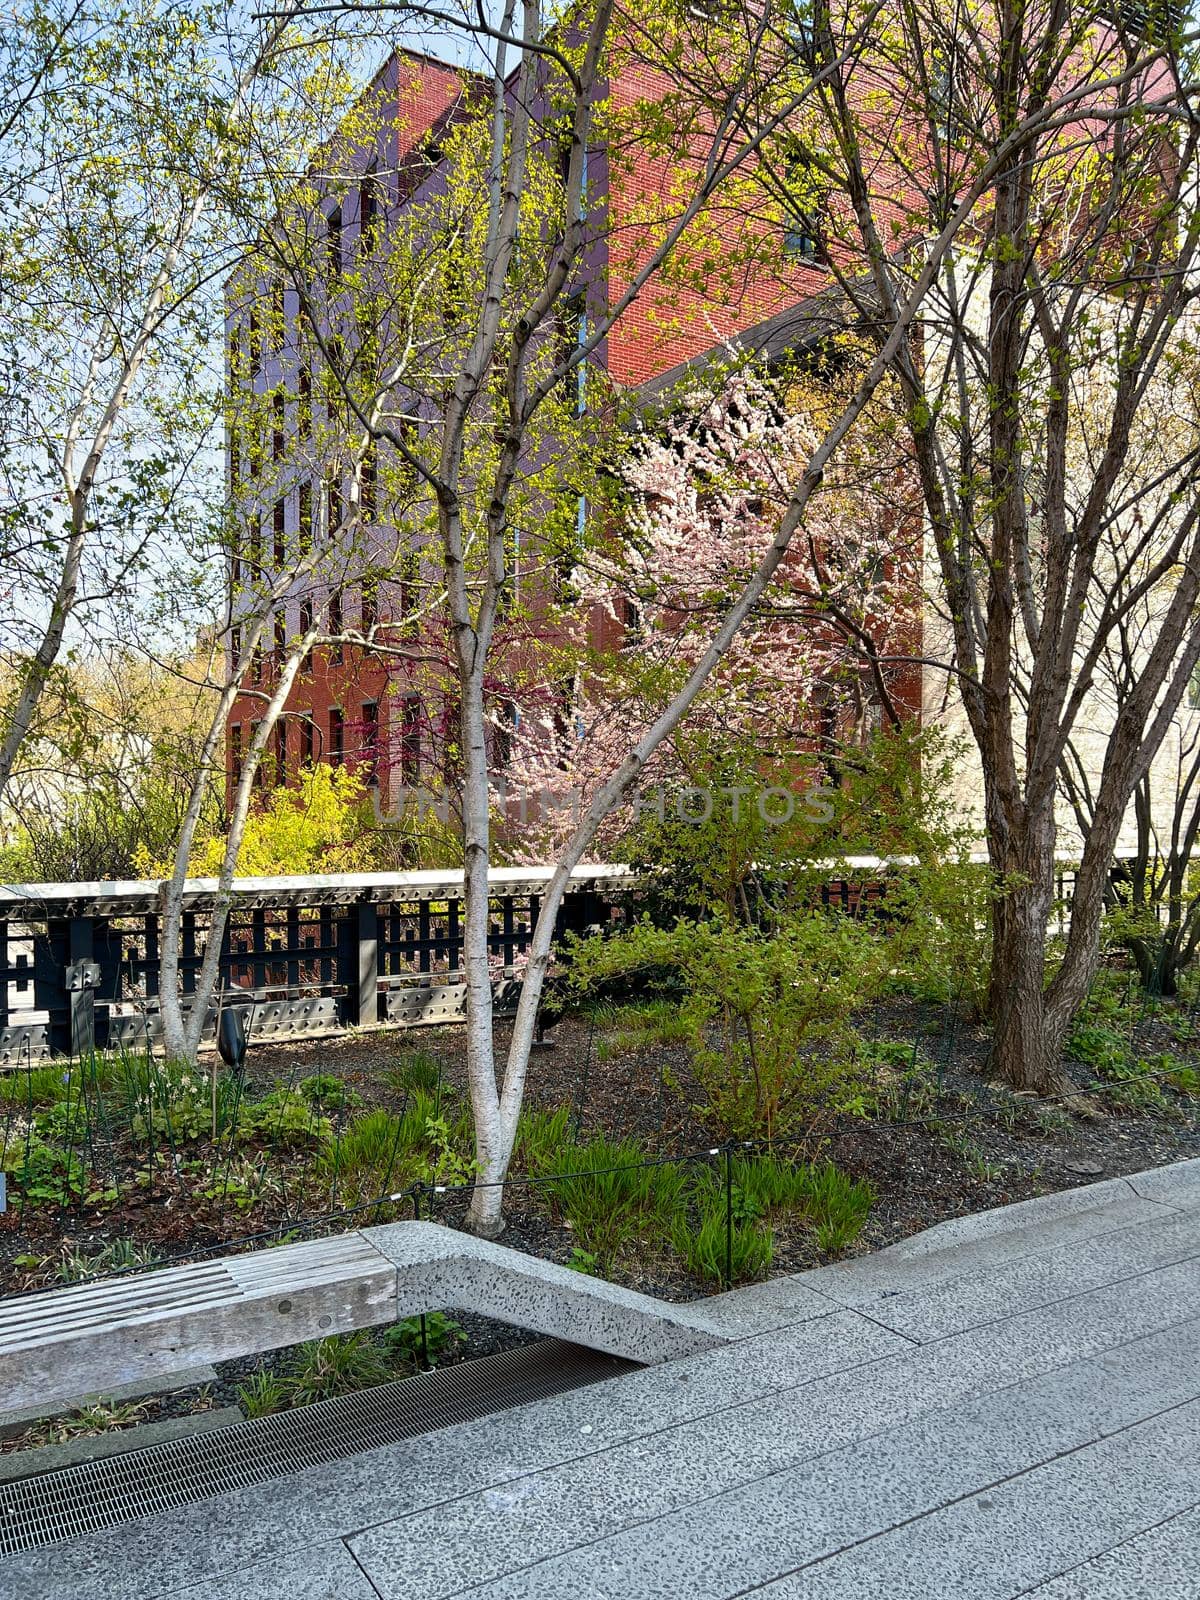 The High Line 1.45 mile long elevated linear park, greenway and rail trail created on a former New York Central Railroad spur by Bonandbon